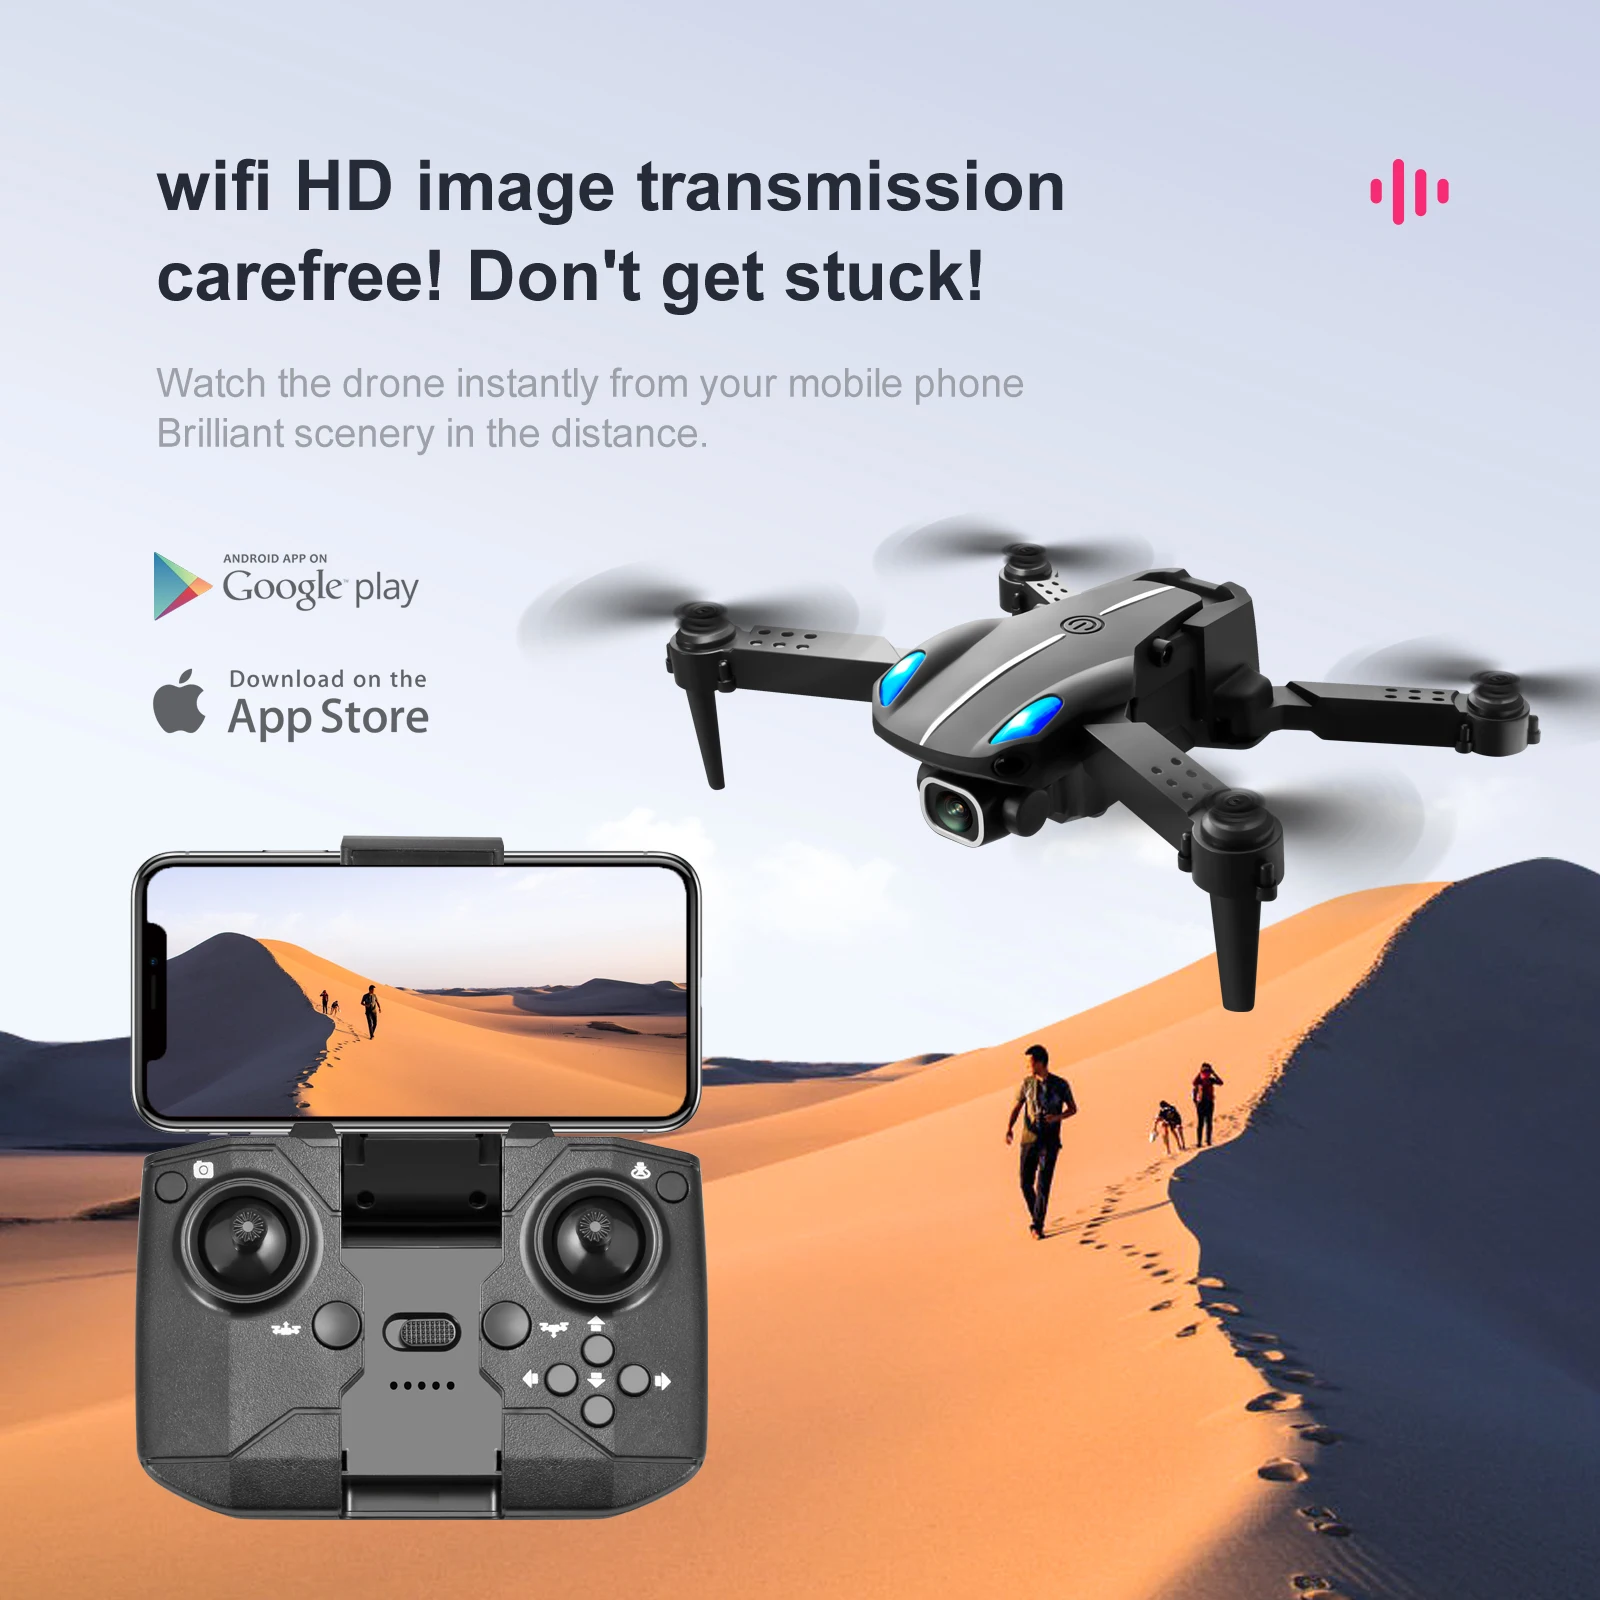 KY907 PRO Drone, android app on google play download on the store app - watch the